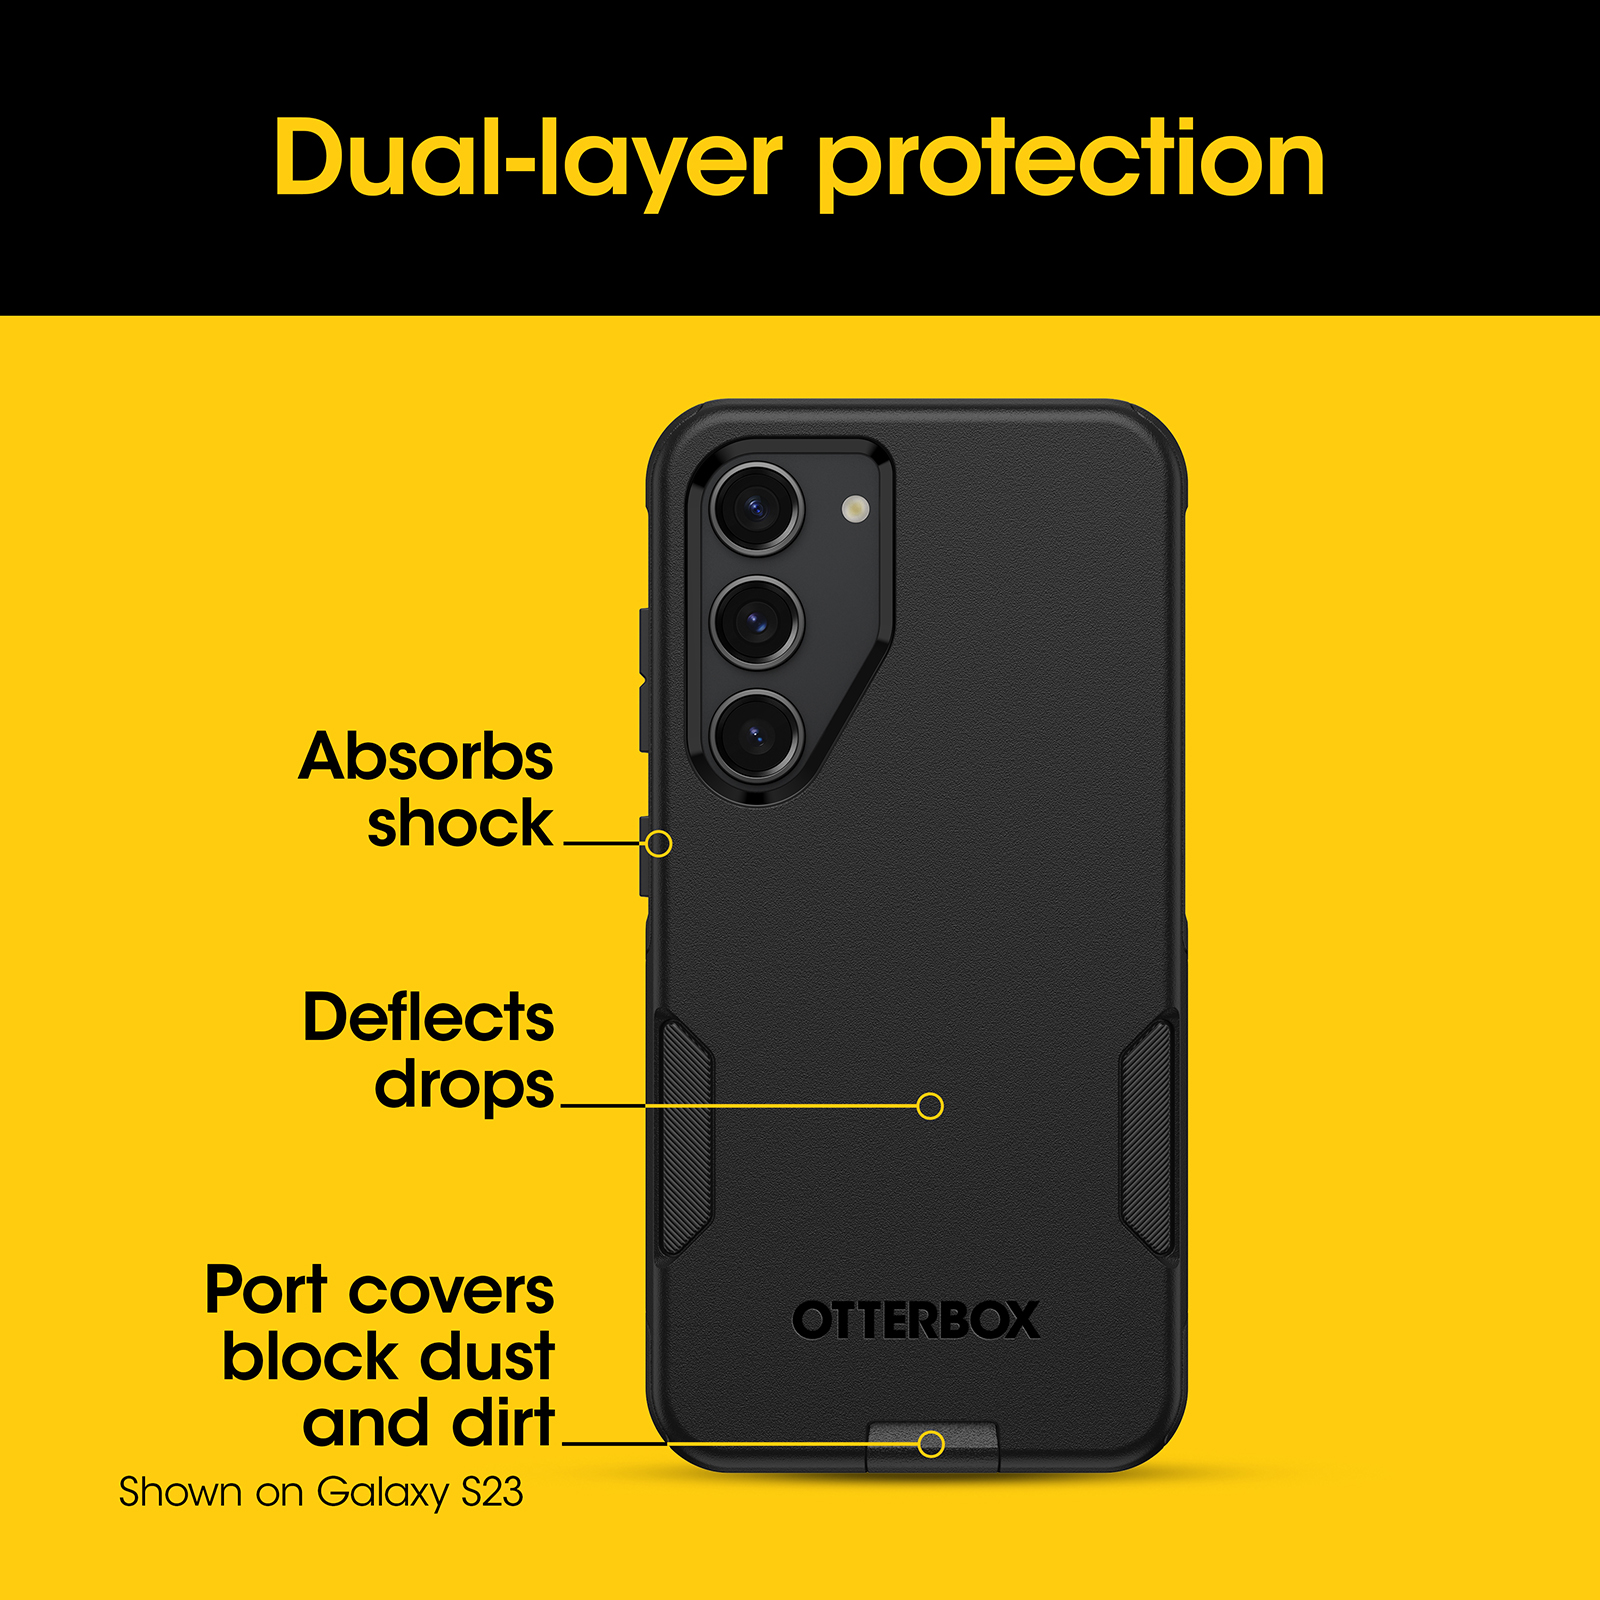 https://www.otterbox.com/on/demandware.static/-/Sites-masterCatalog/en/dwb4b994d9/productimages/dis/cases-screen-protection/commuter-galaxy-s24-ultra/commuter-galaxy-s24-ultra-black-4.jpg